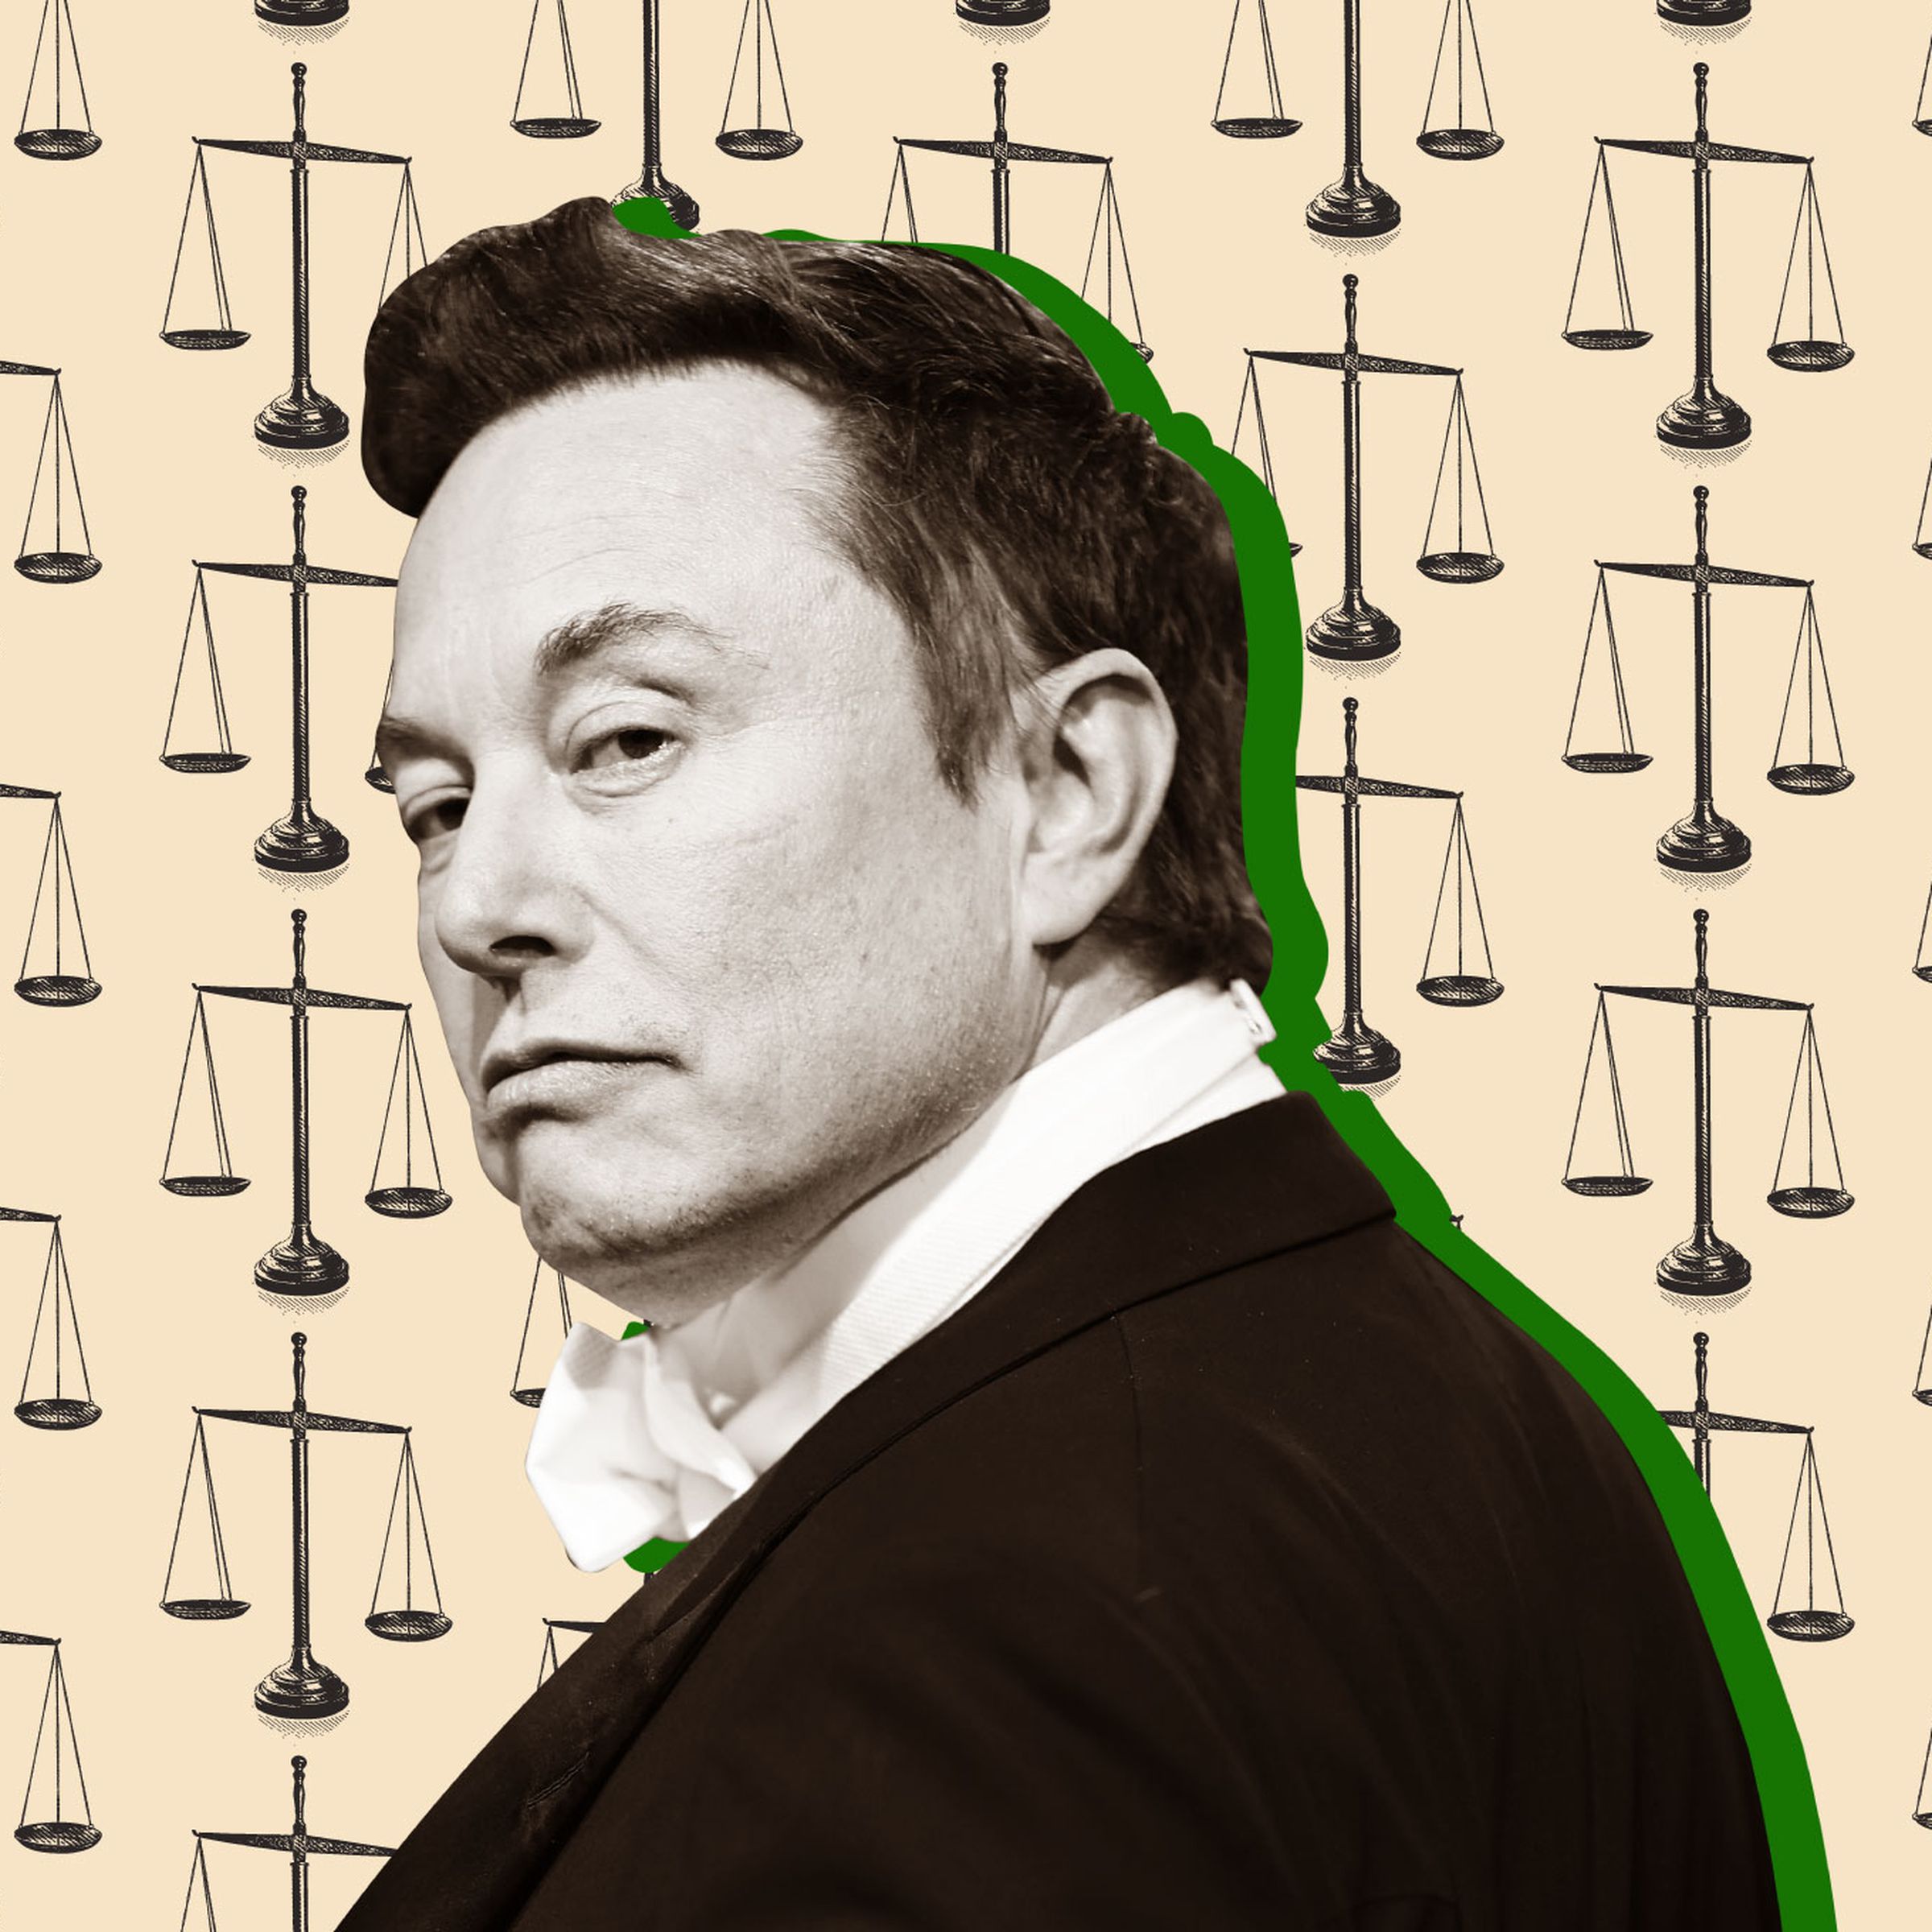 An image of Elon Musk in front of trial scales.